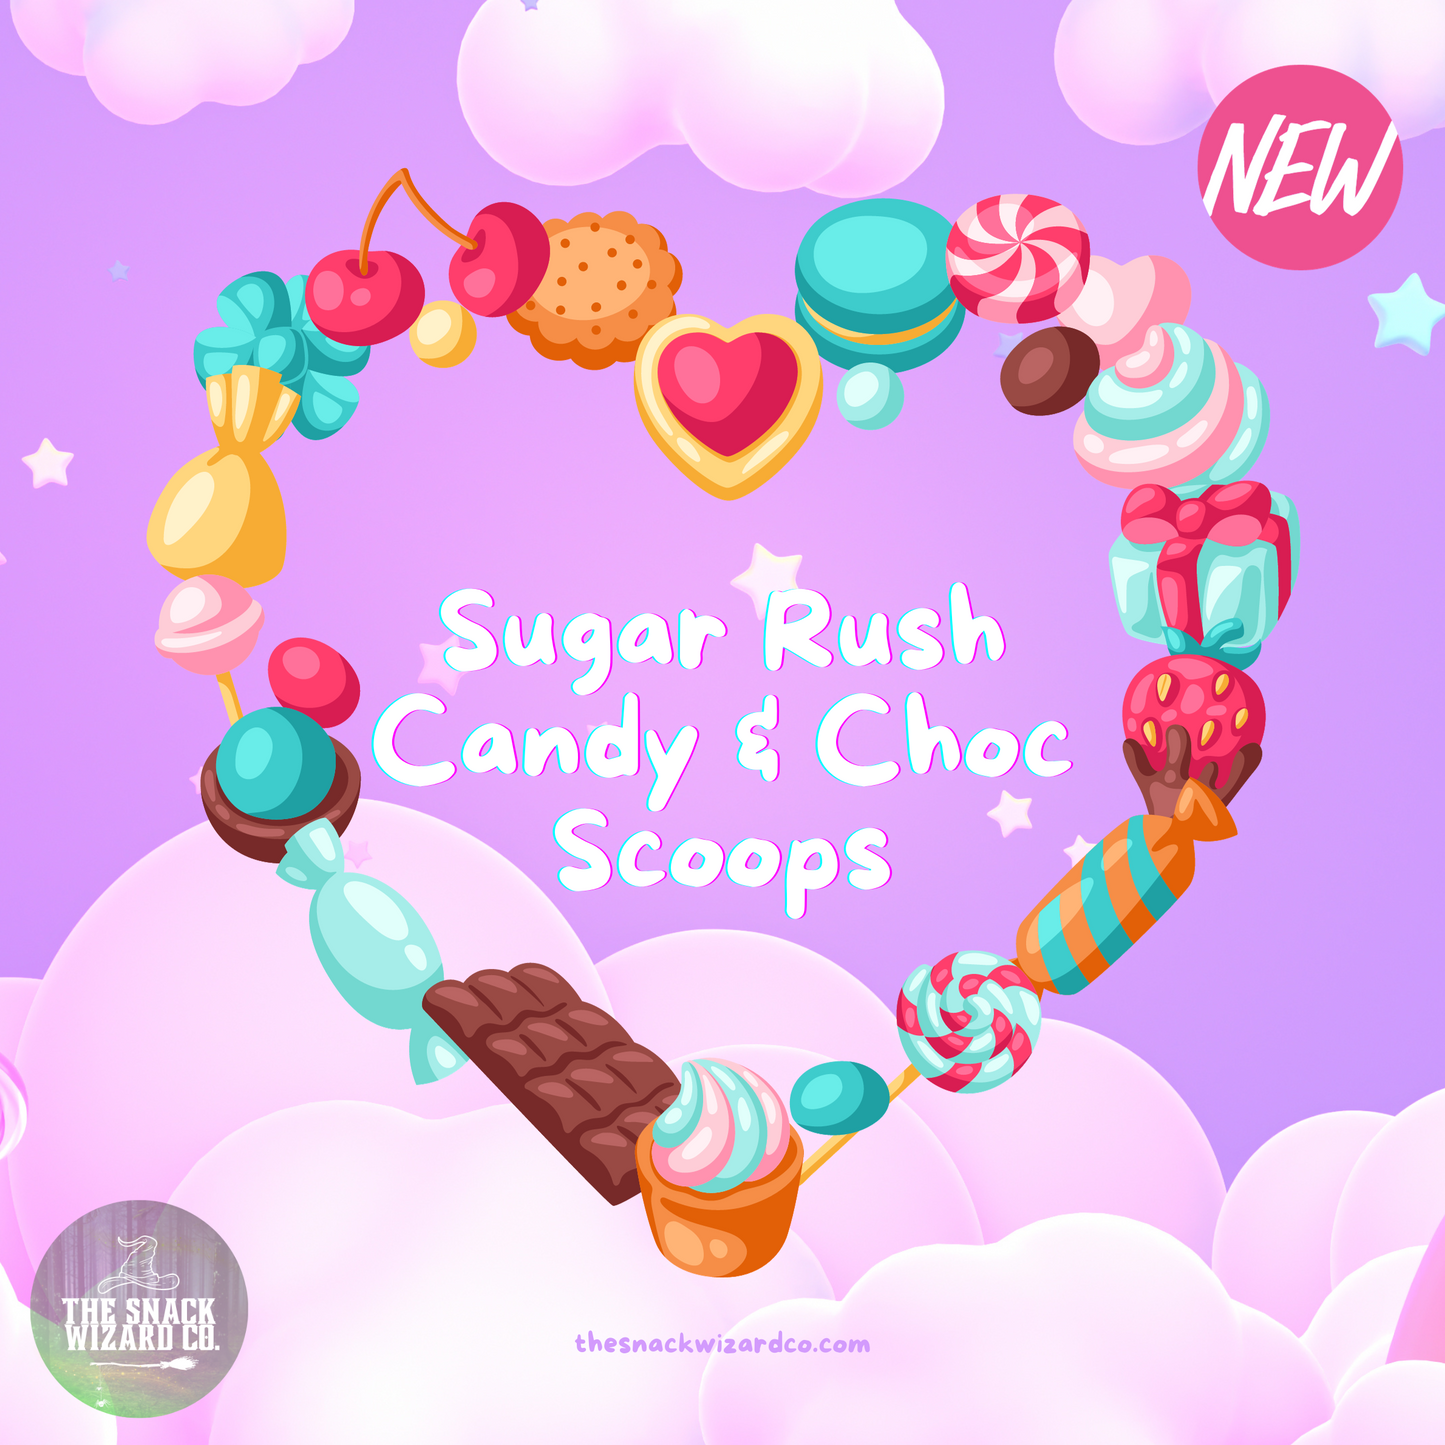 Sugar Rush Candy Scoops (Candy & Choc only)